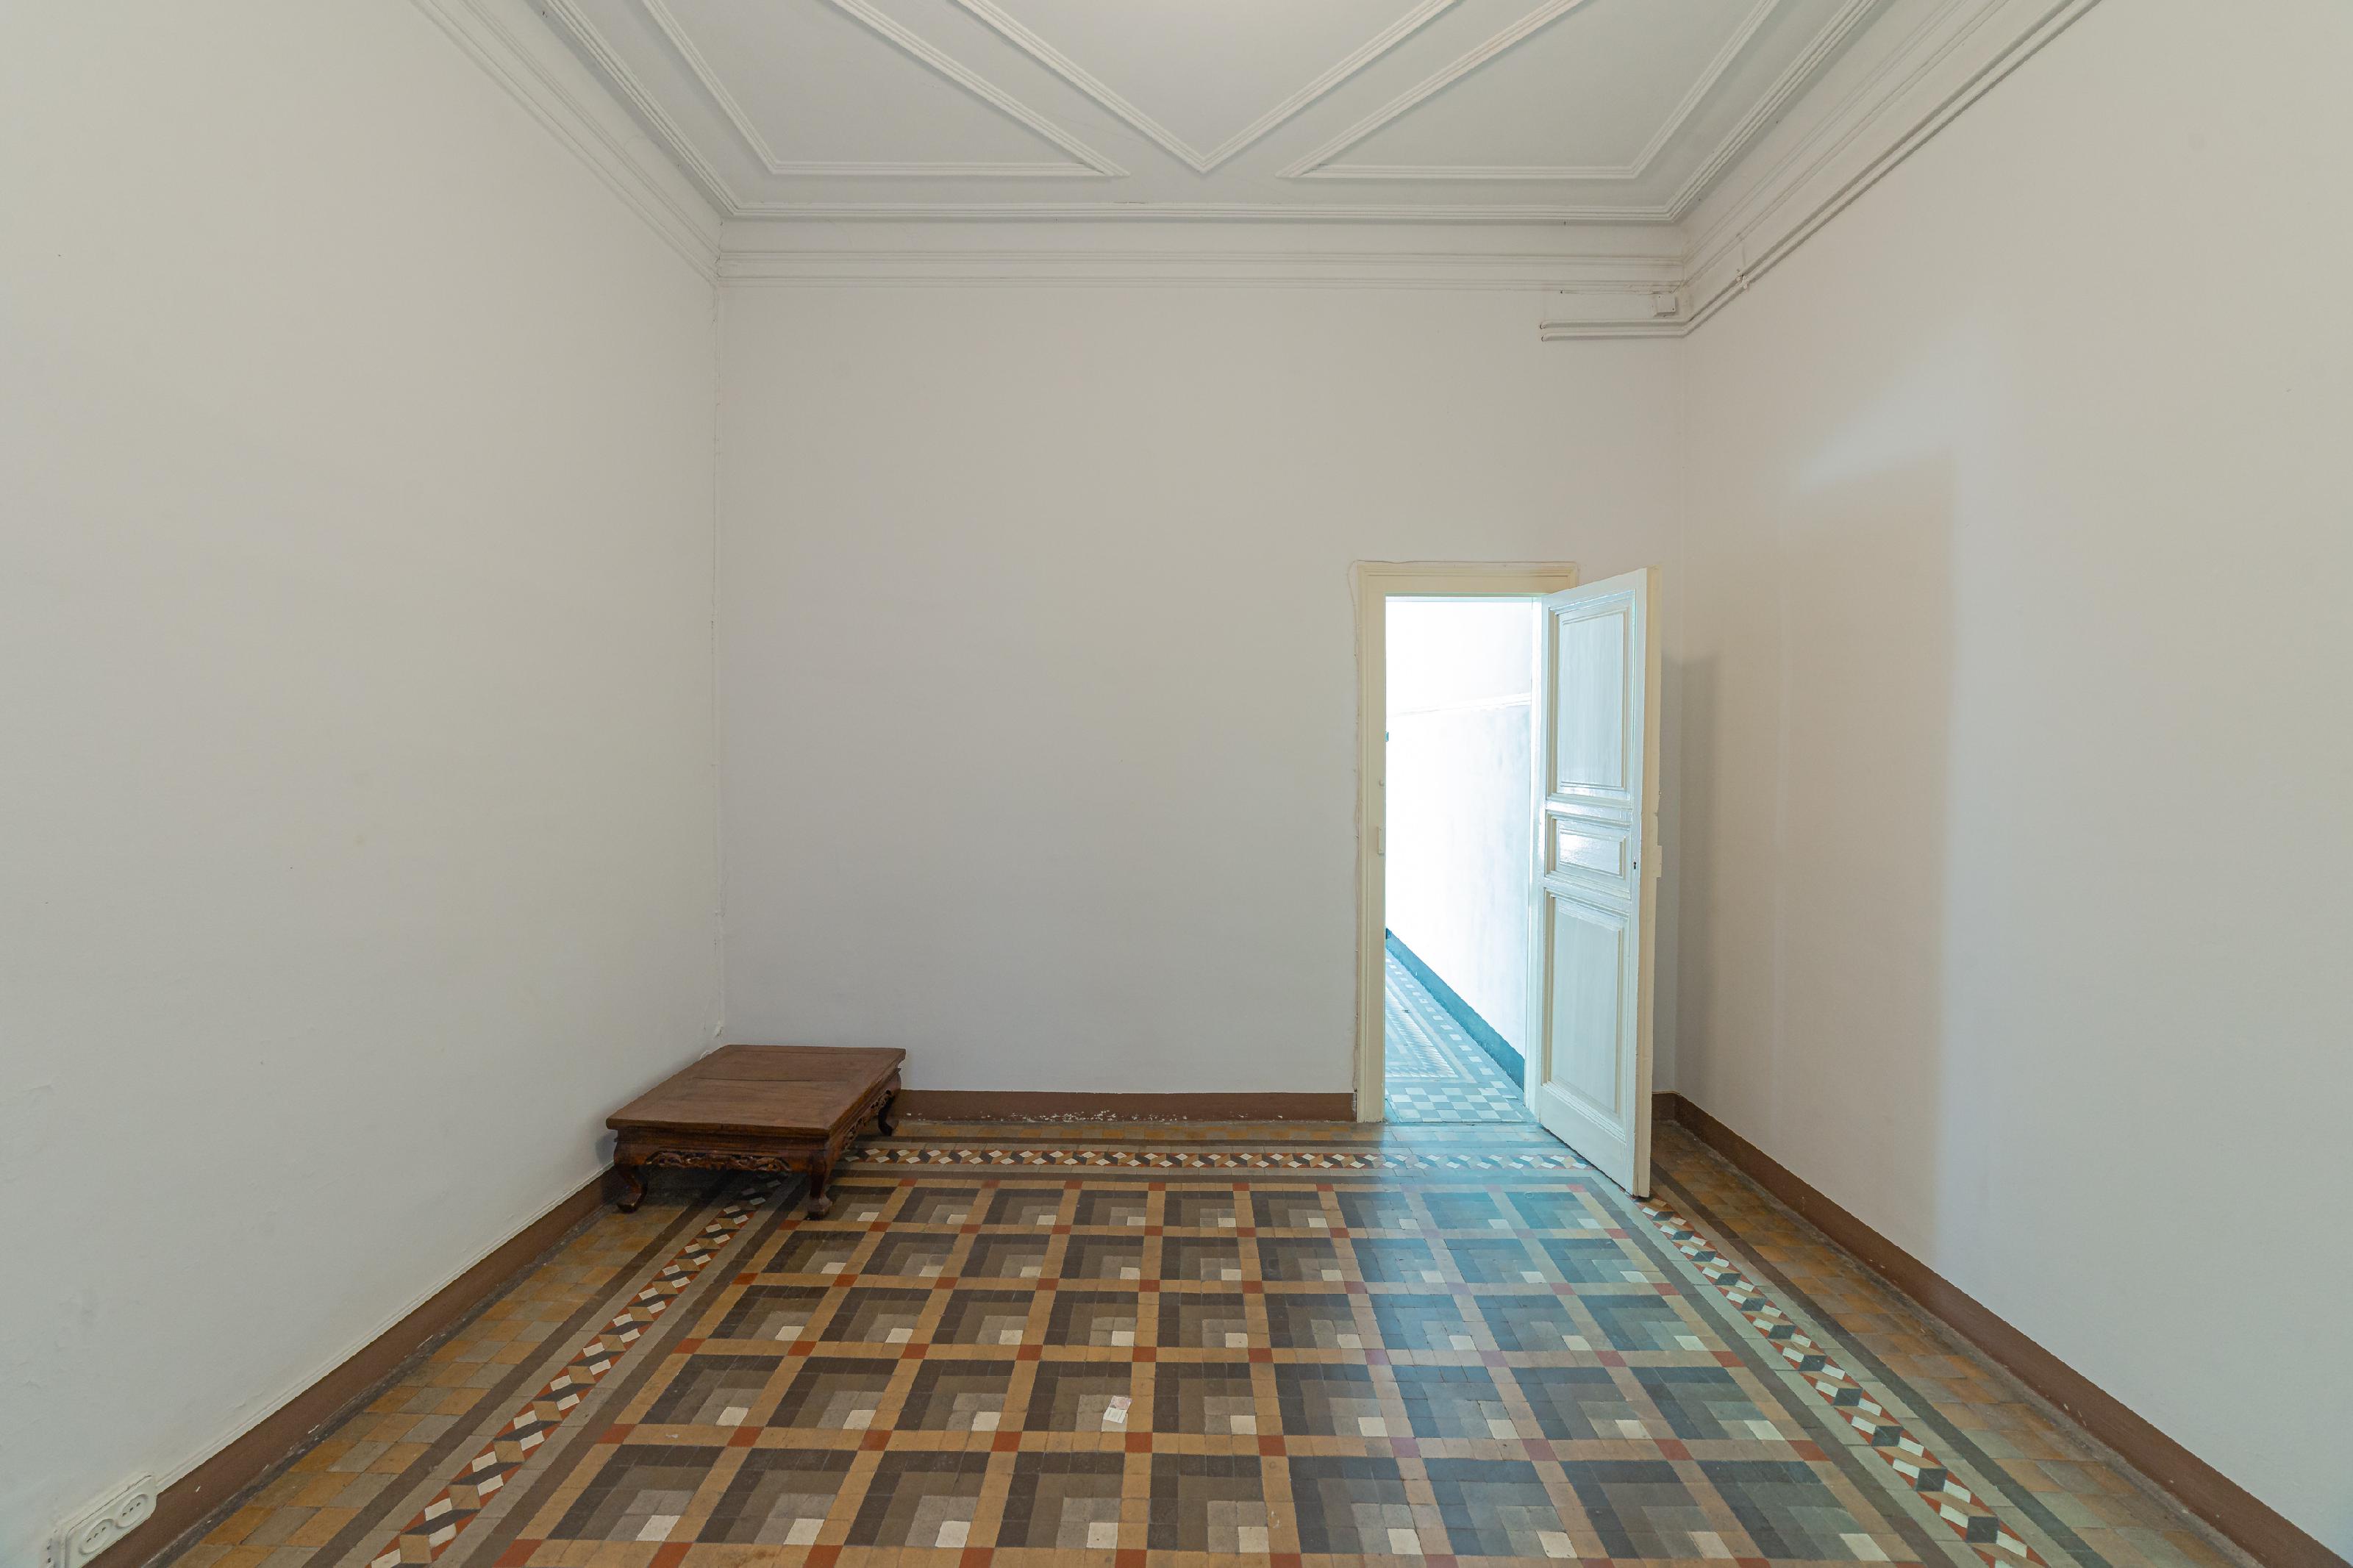 273416 Flat for sale in Eixample, Old Esquerre Eixample 10